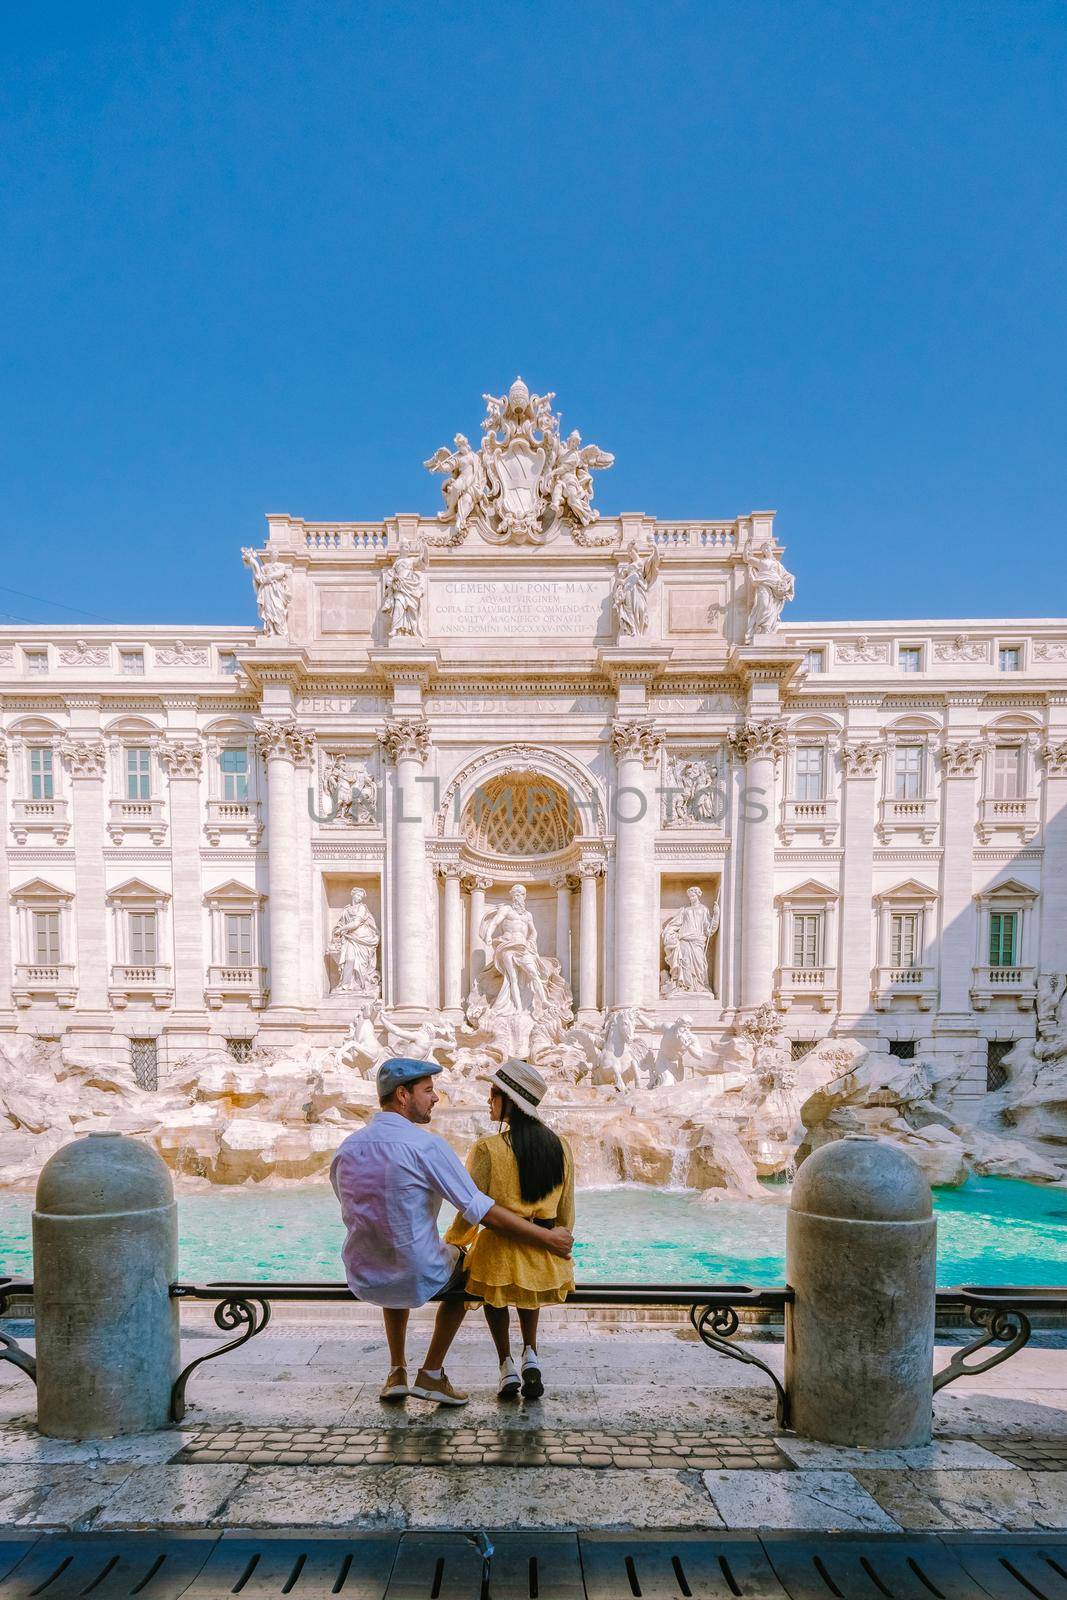 Trevi Fountain, rome, Italy in the morning by fokkebok